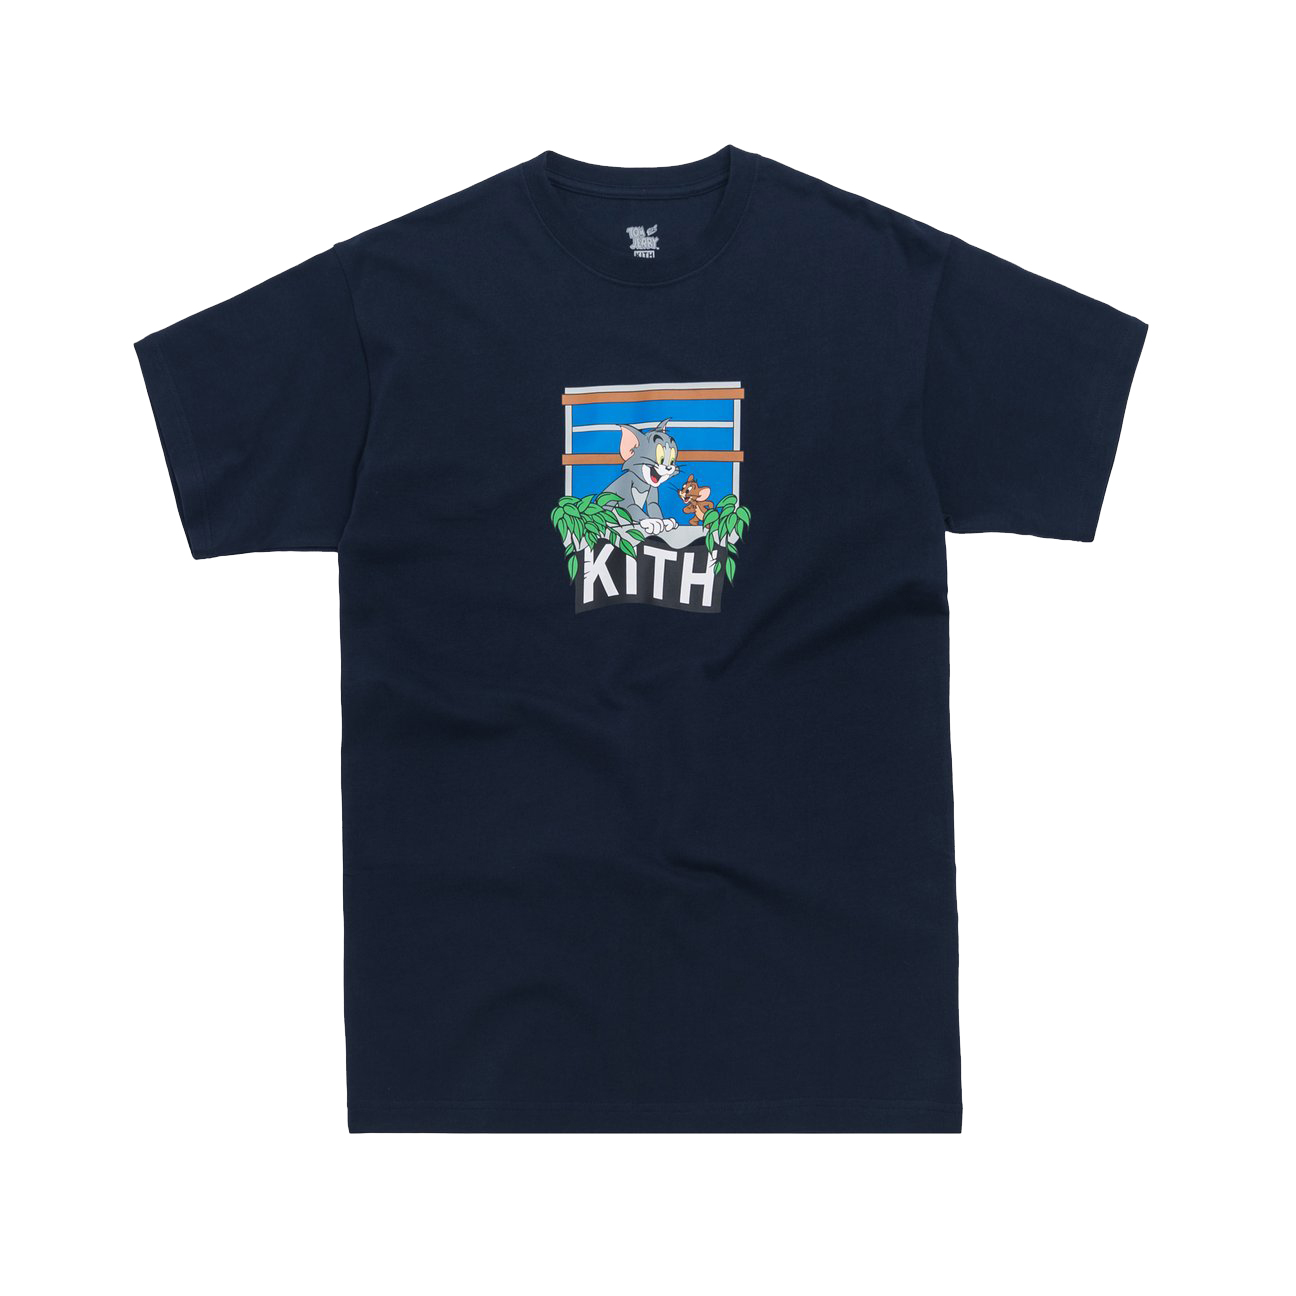 Kith x Tom u0026 Jerry Hang Out Tee Navy